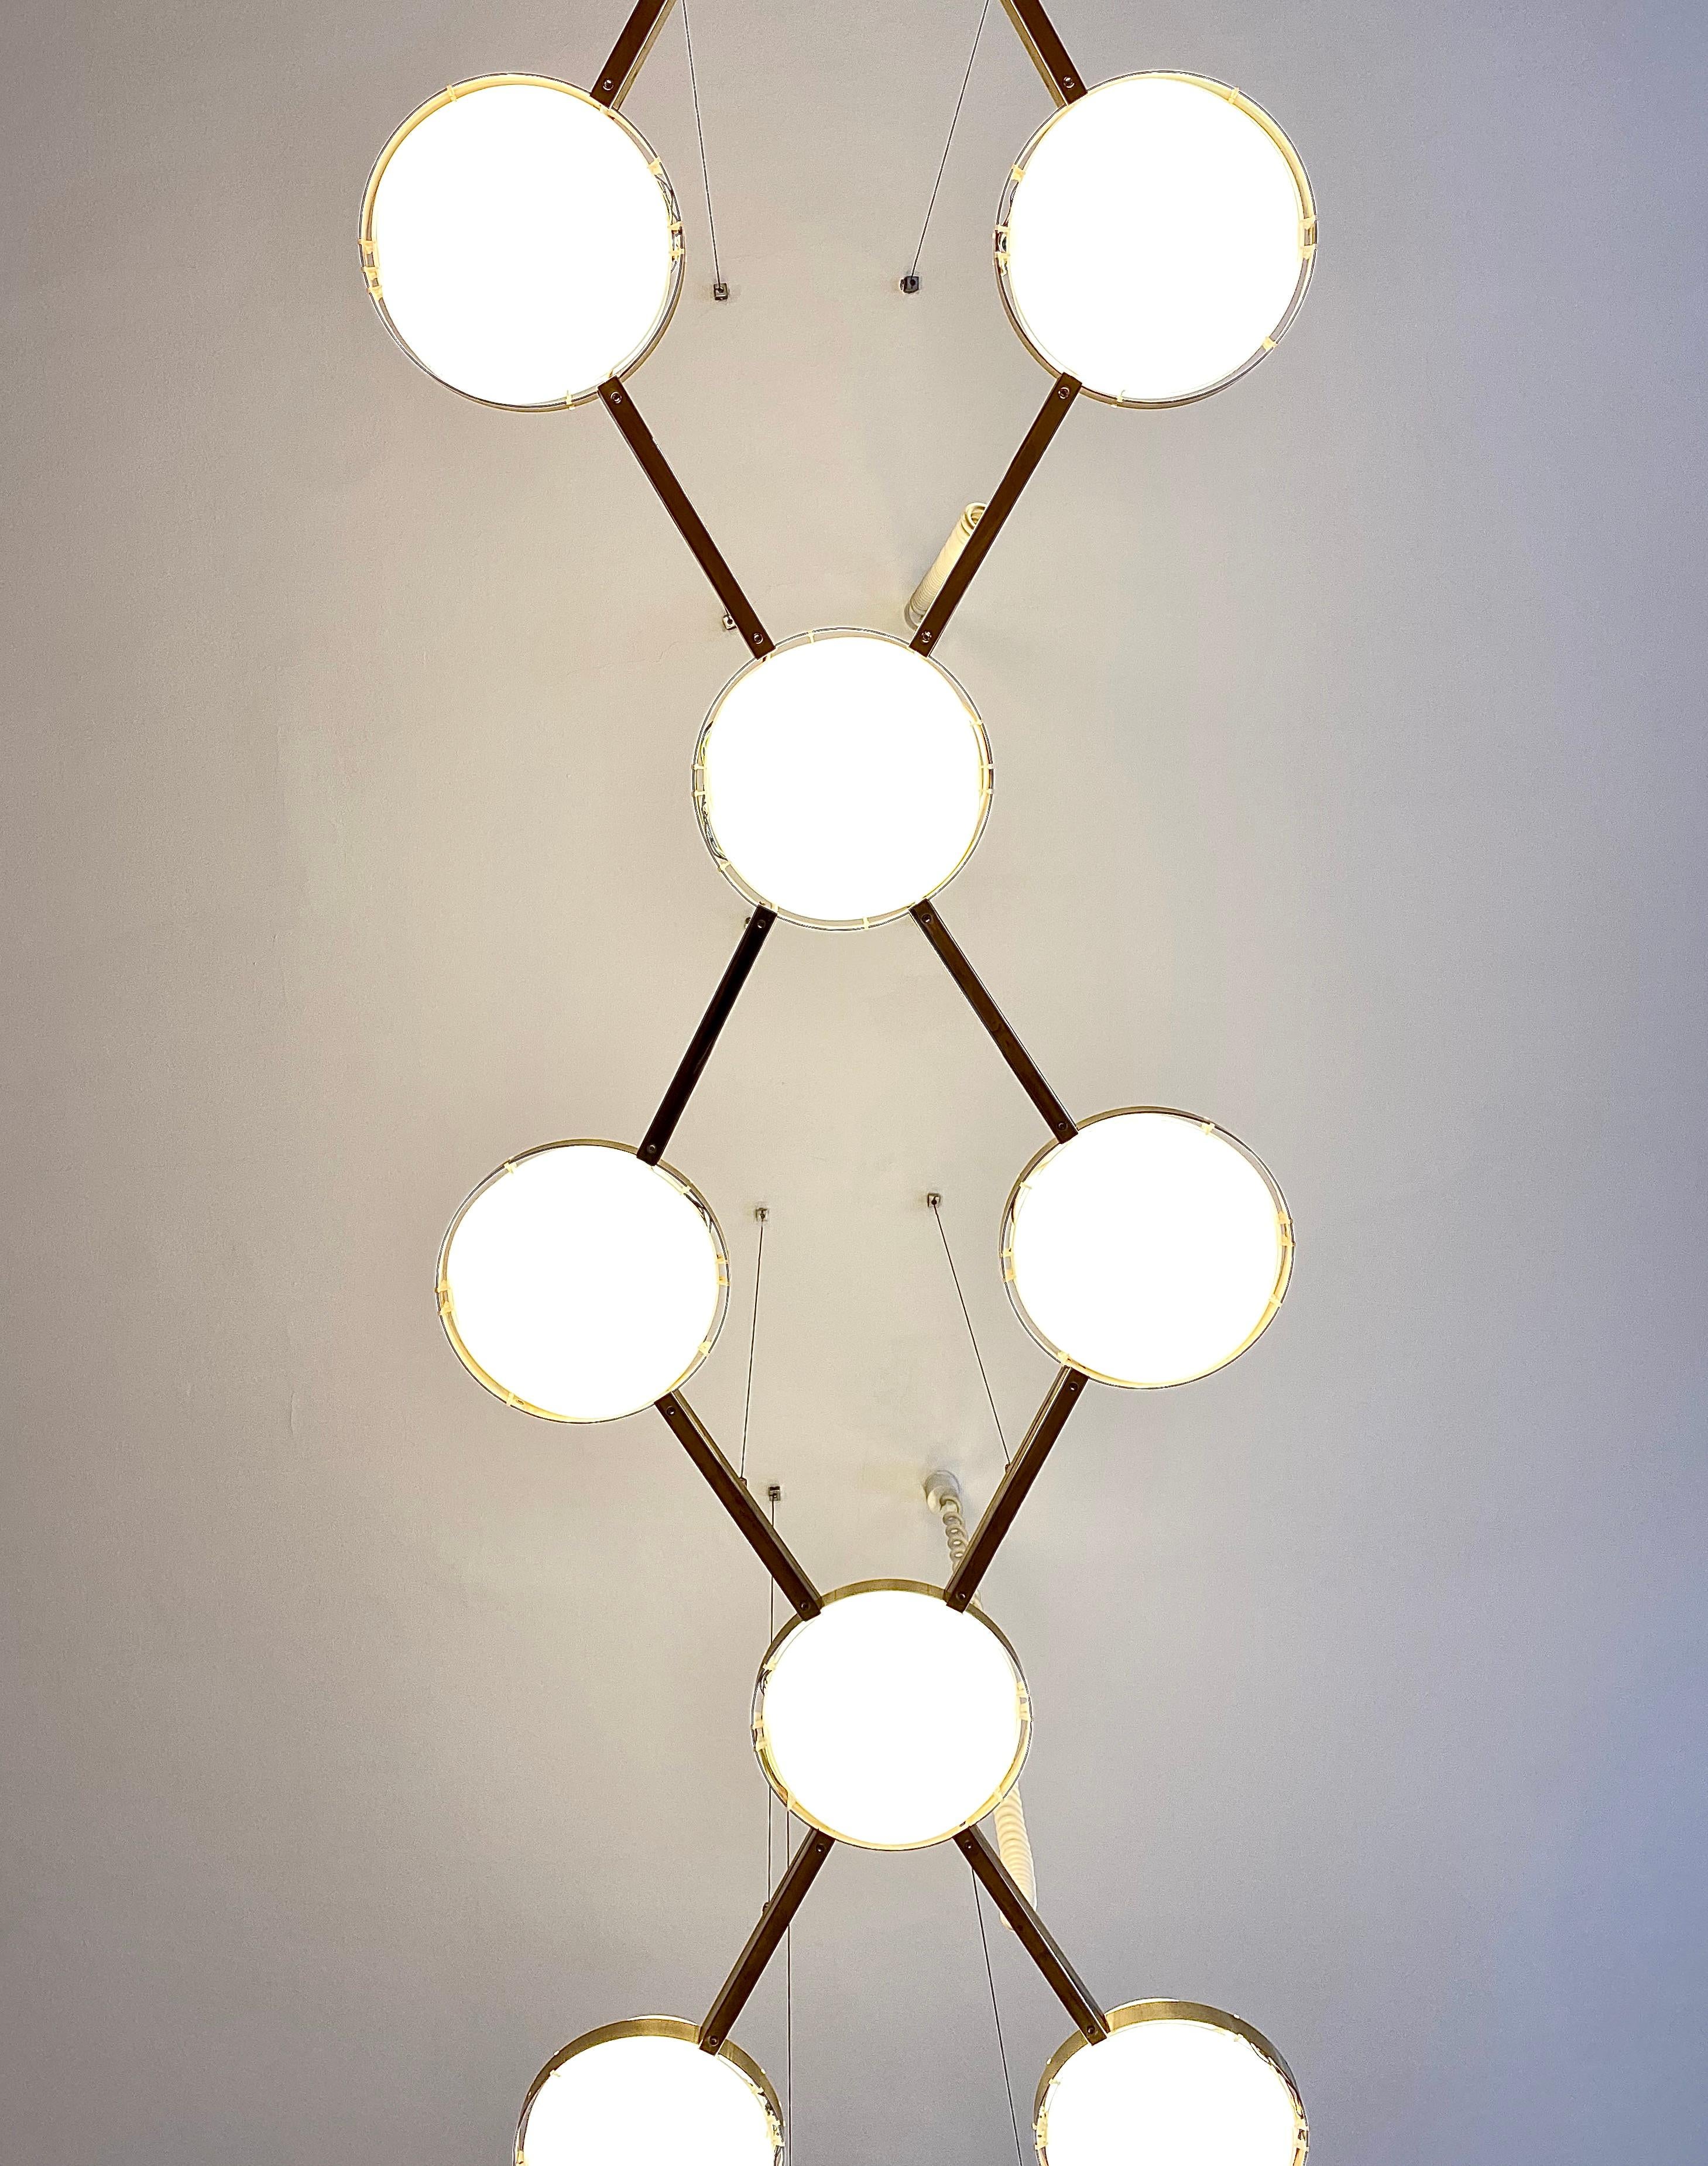 A beautiful and large Space Age ceiling lamp chandelier from the 1960s, designed and executed by Wilhelm Vest / Vest Leuchten in Austria. An impressive high-quality piece with a frame of golden anodized aluminum and ten white acrylic light diffuser